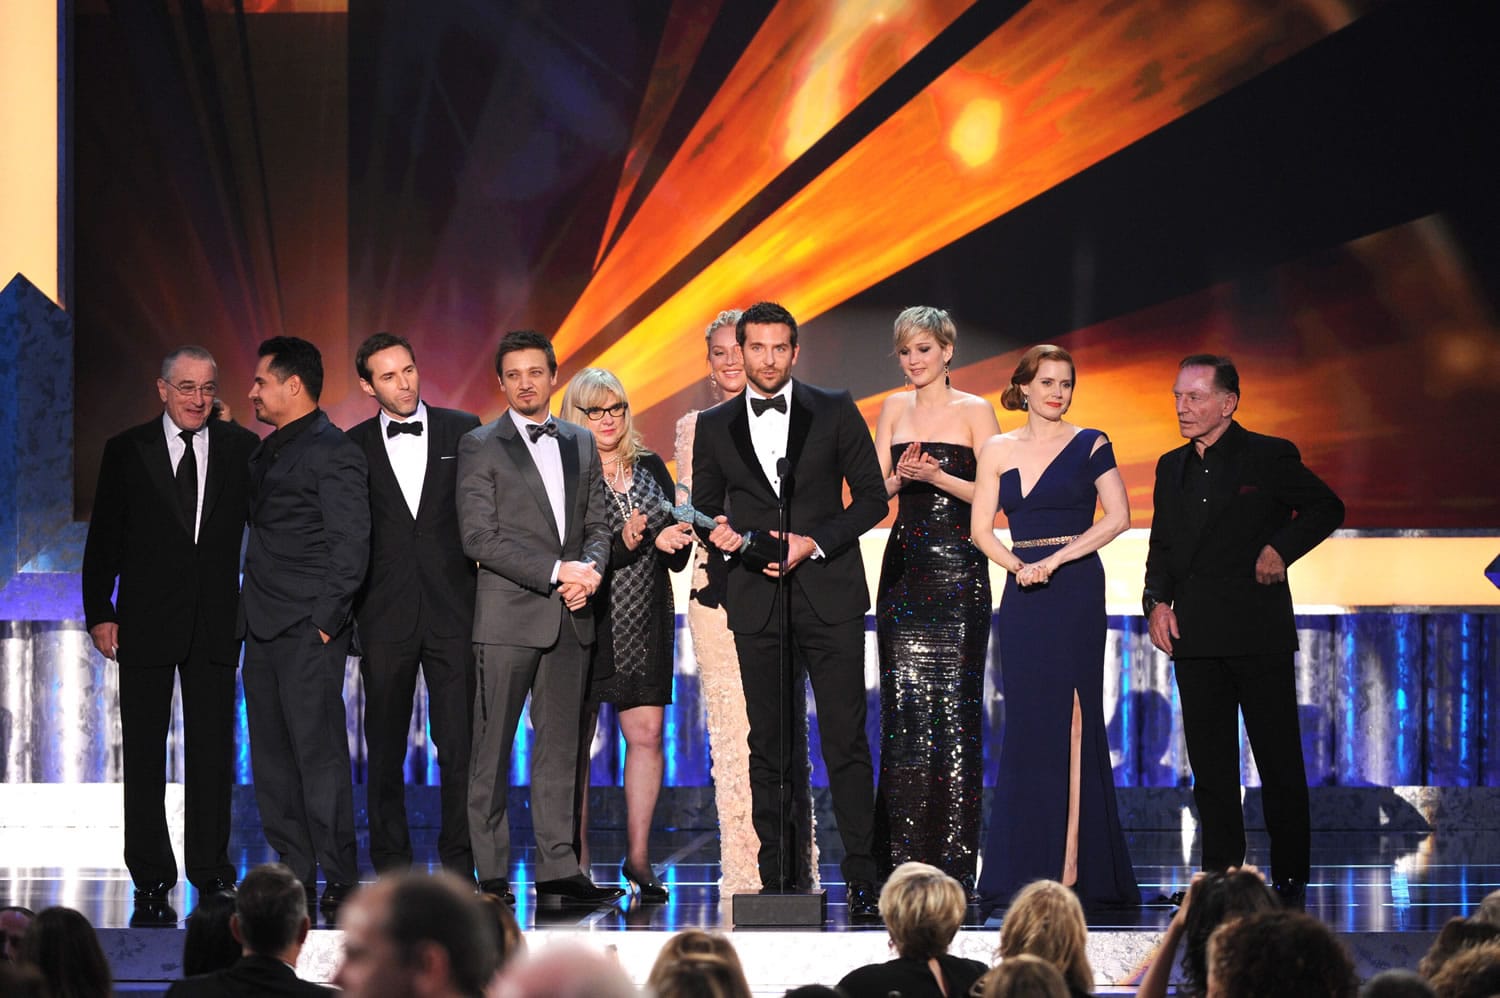 From left, Robert De Niro, Michael Pena, Alessandro Nivola, Jeremy Renner, Colleen Camp, Elisabeth Rohm, Bradley Cooper, Jennifer Lawrence, Amy Adams and Paul Herman accept the award for outstanding performance by a cast in a motion picture for &quot;American Hustlei&quot;at the 20th annual Screen Actors Guild Awards at the Shrine Auditorium.